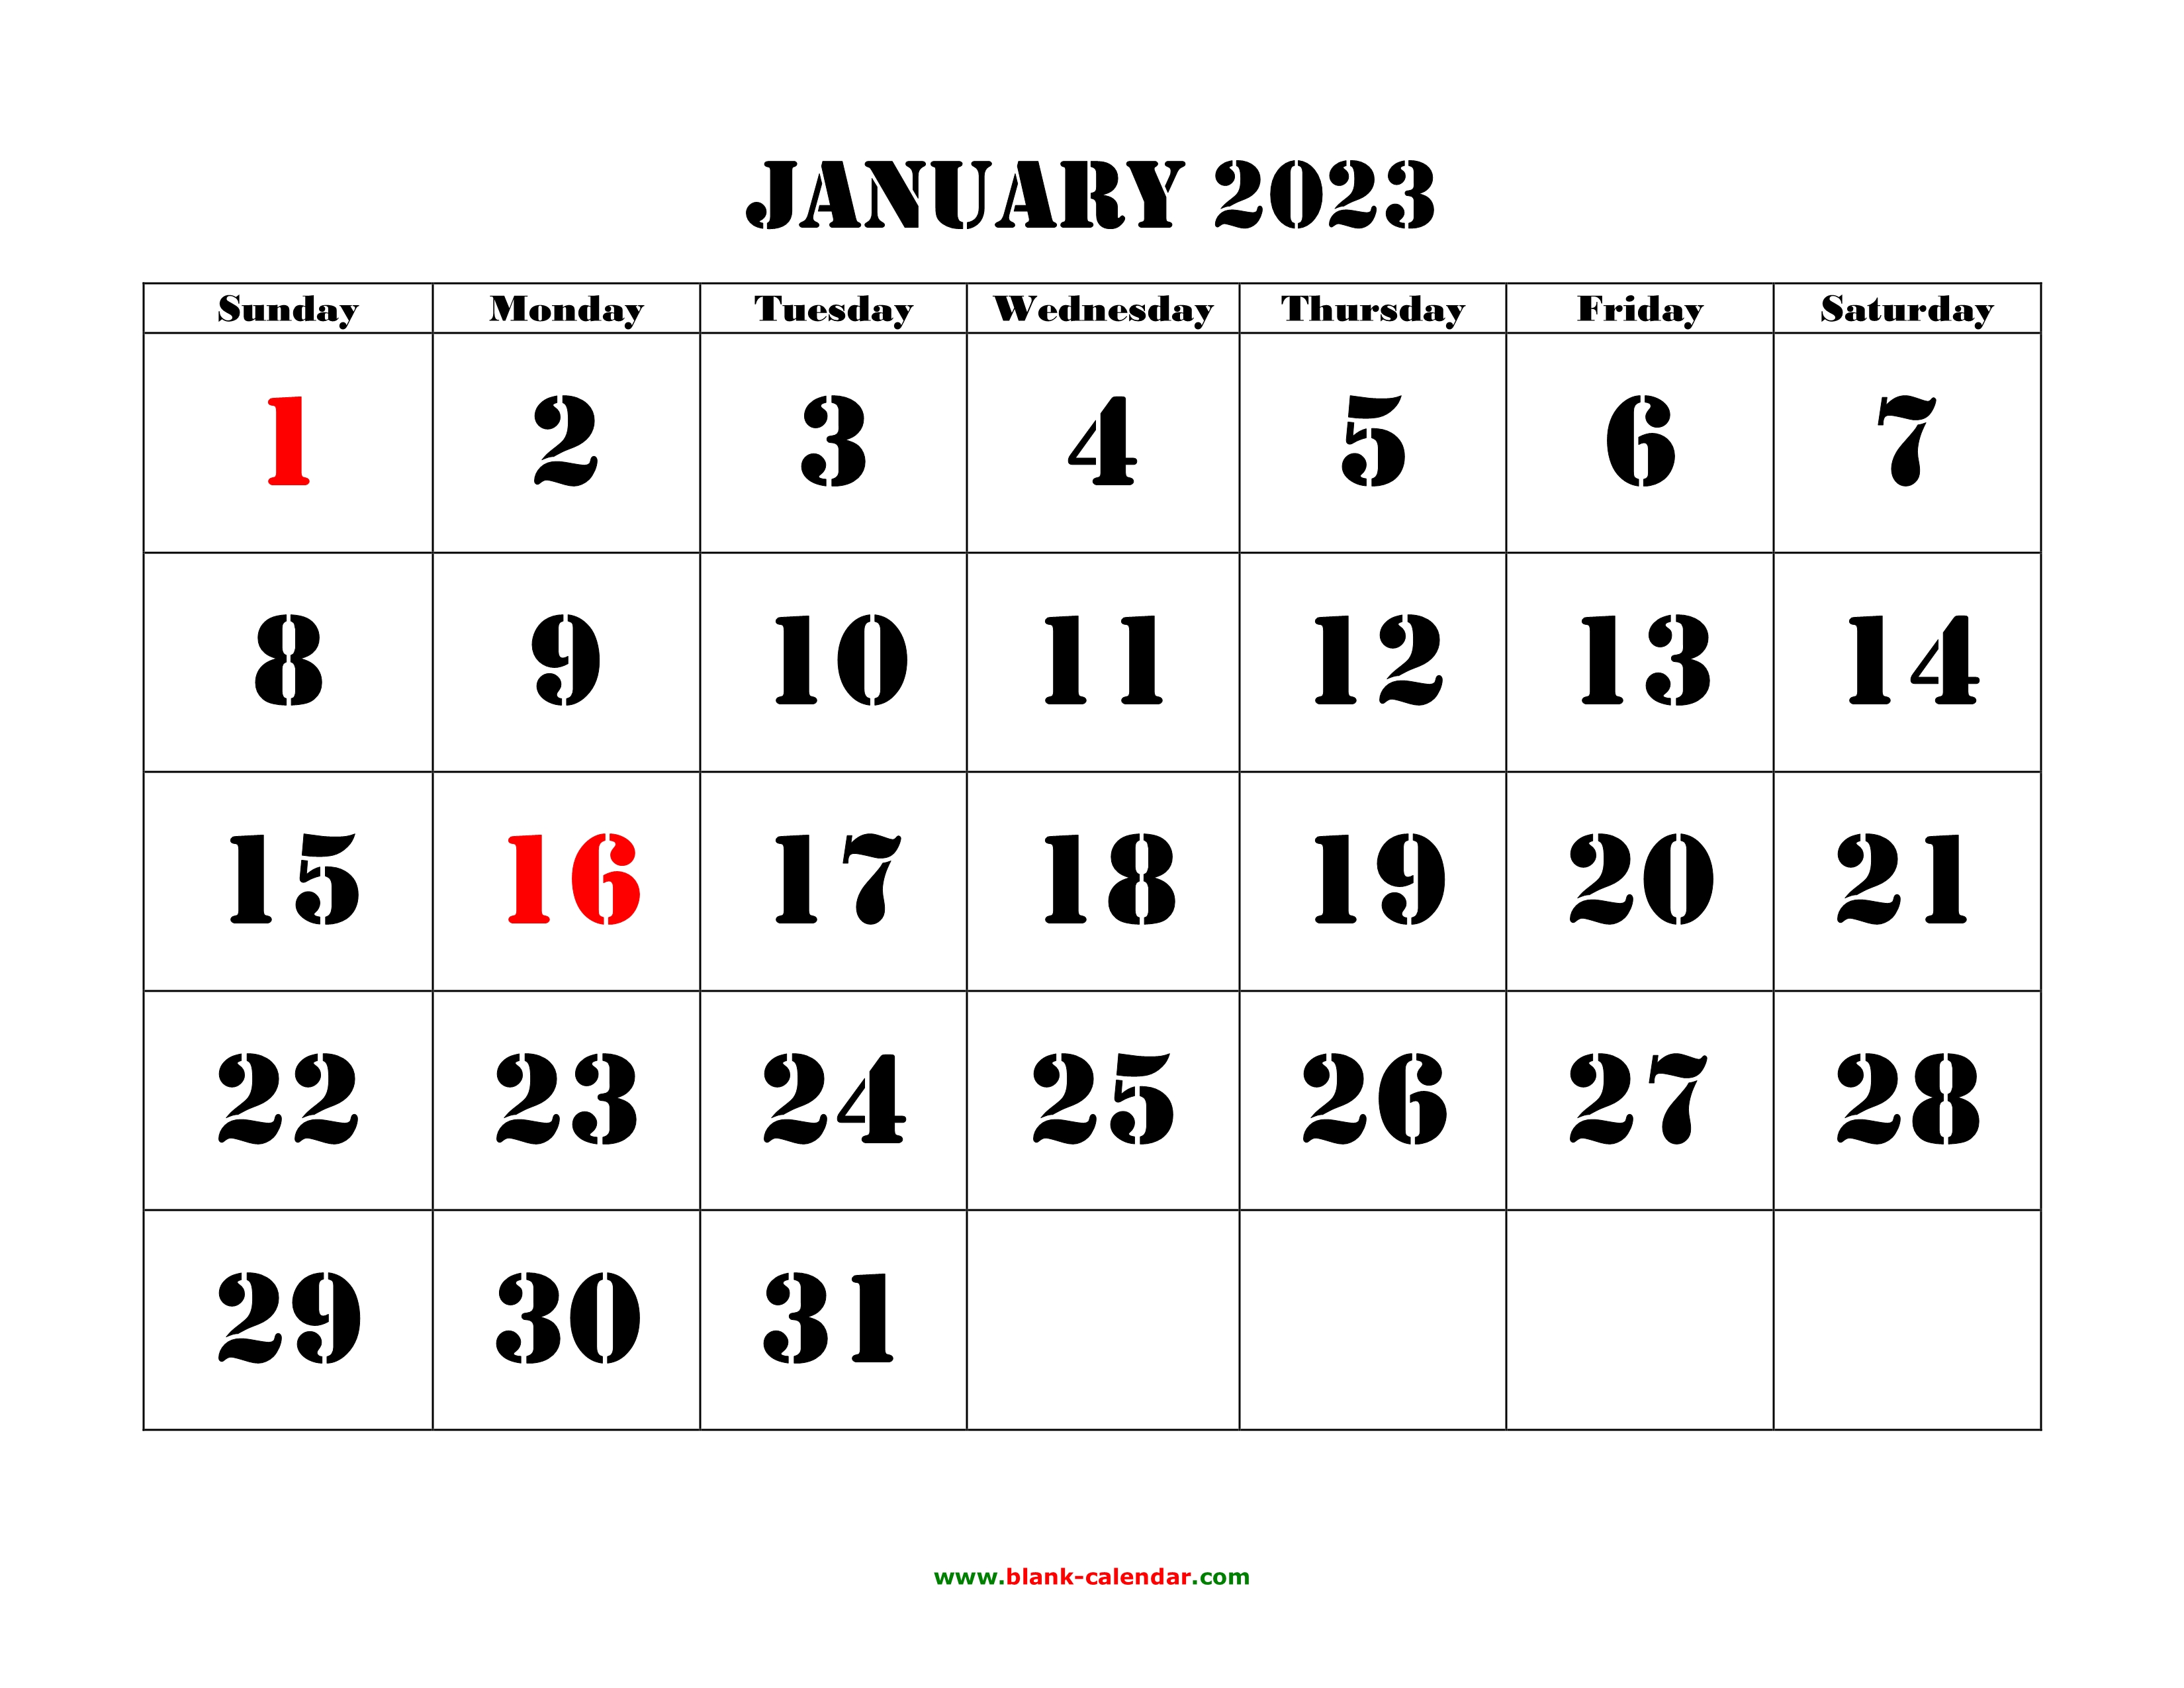 2023 calendar templates and images - 2023 printable large wall calendar 2023 minimalist wall etsy | printable calendar 2023 large